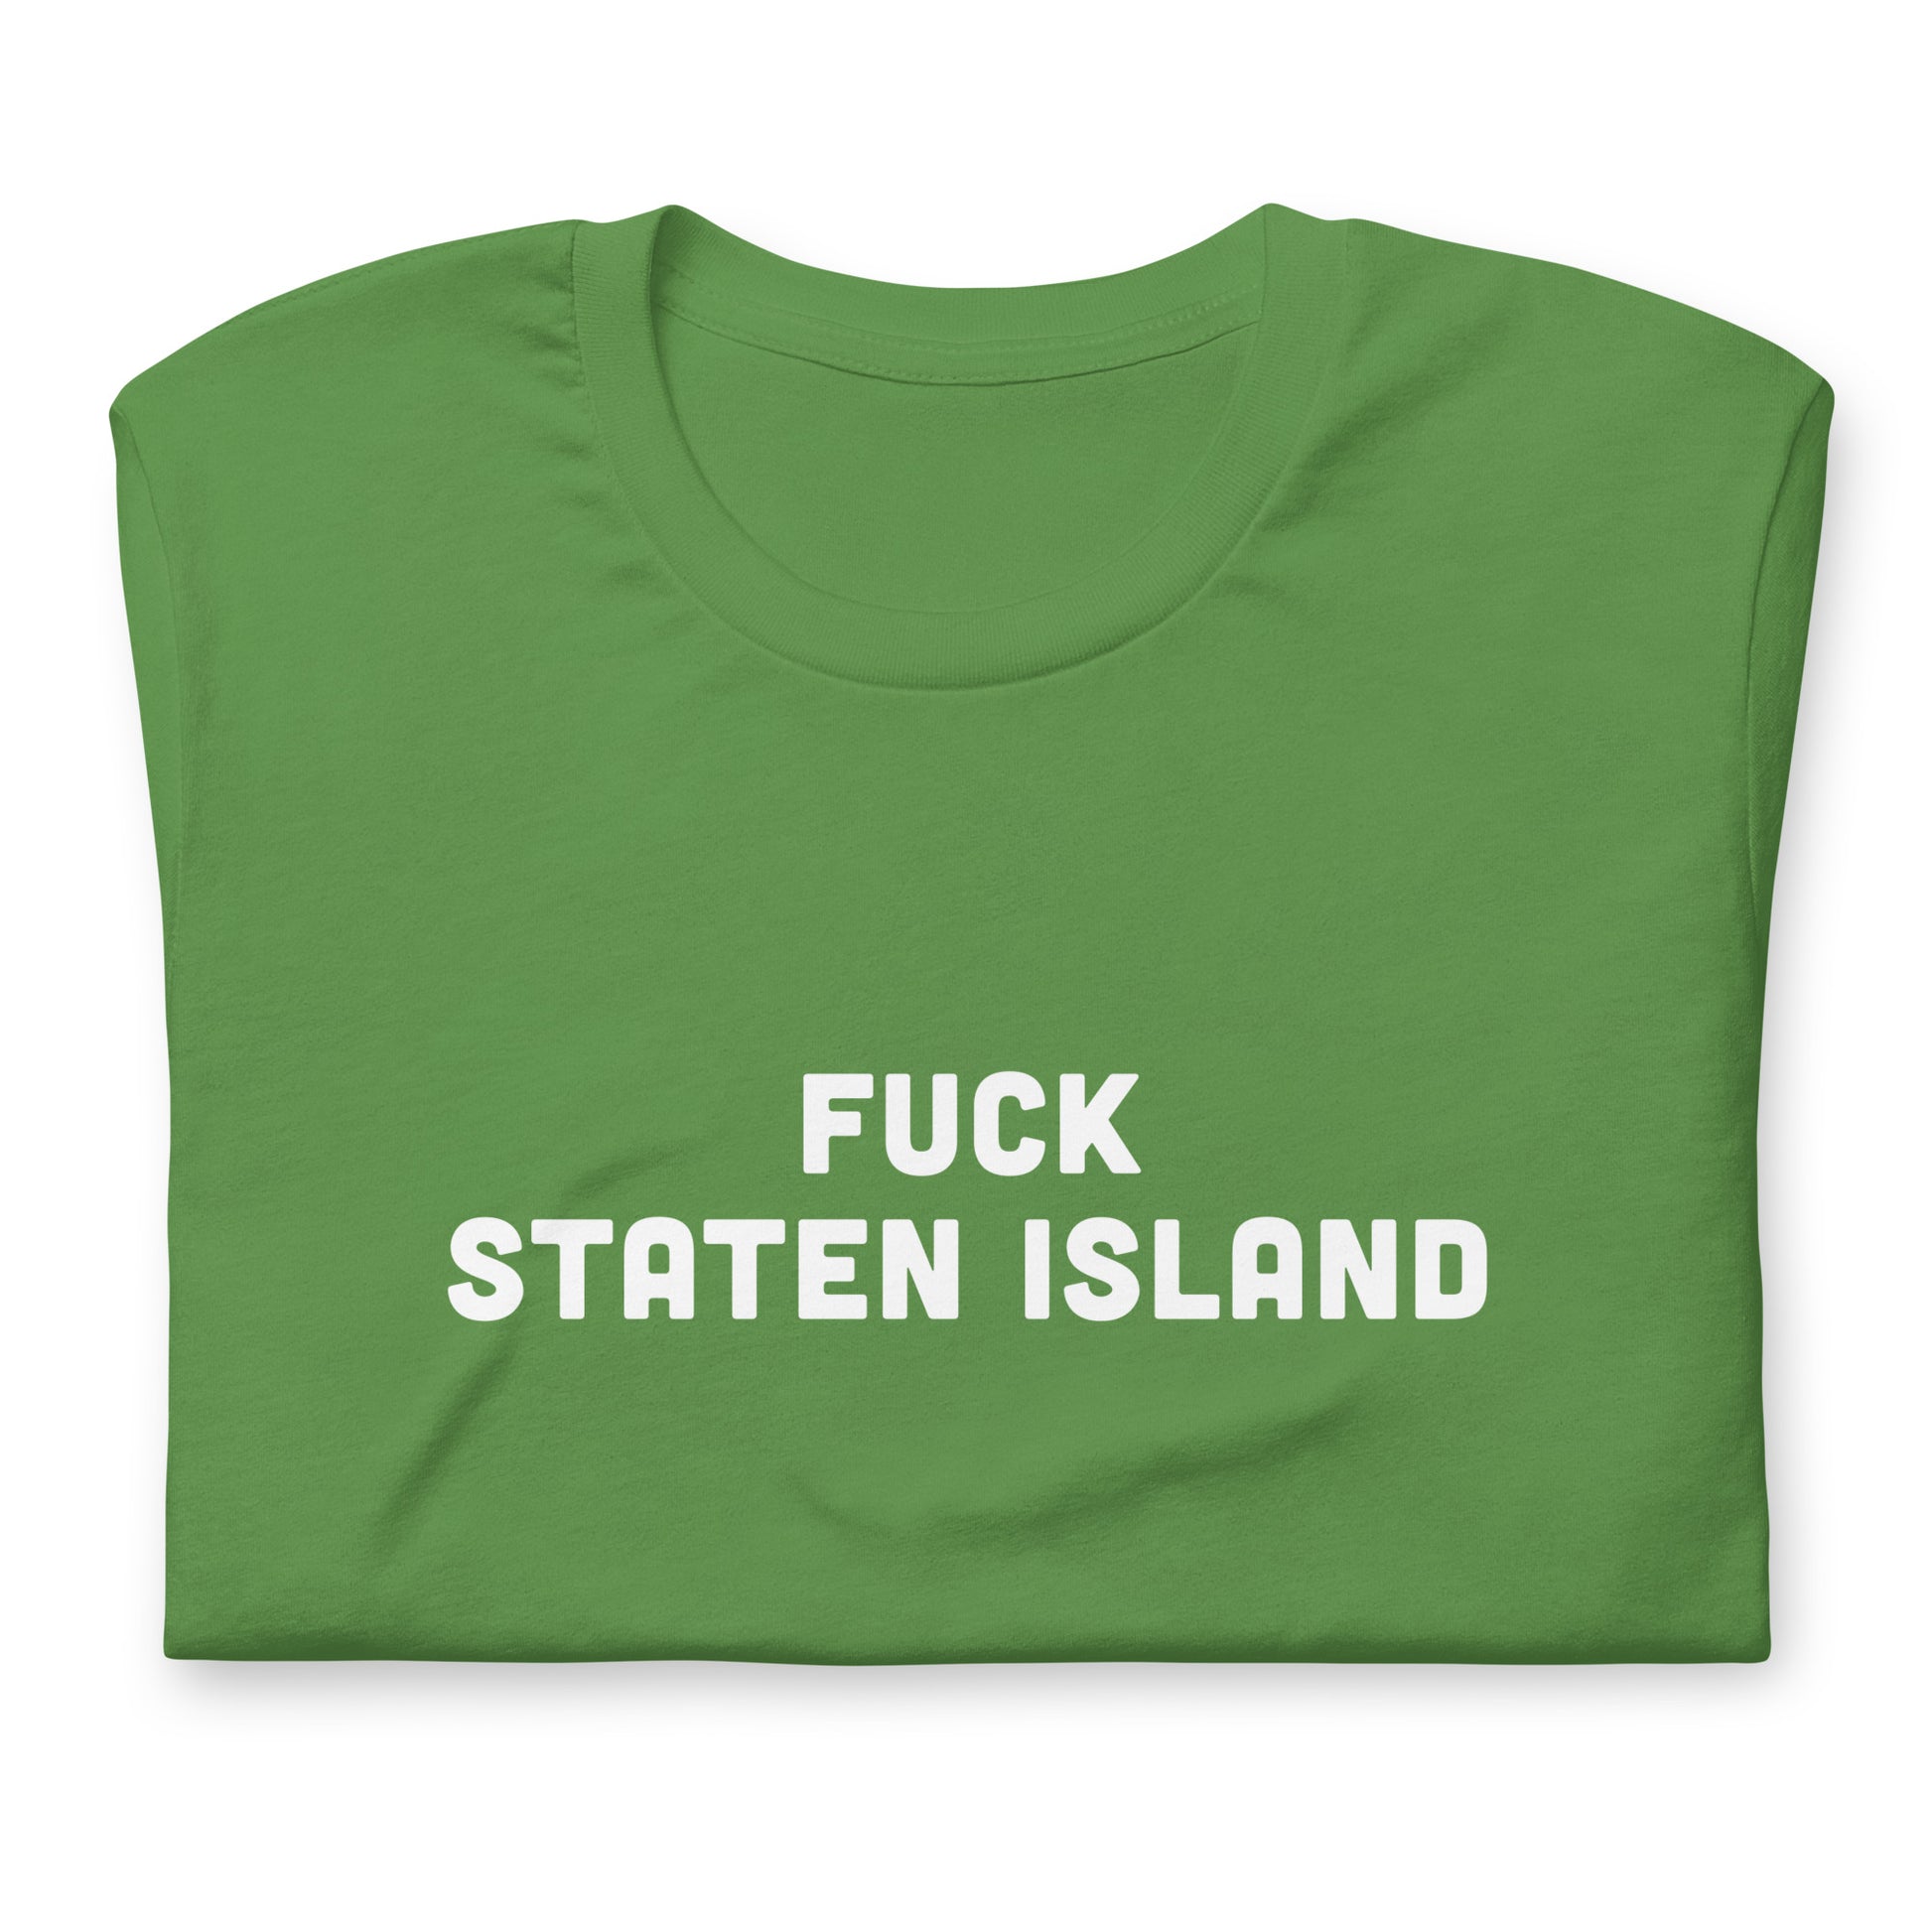 Fuck Staten Island T-Shirt Size 2XL Color Navy